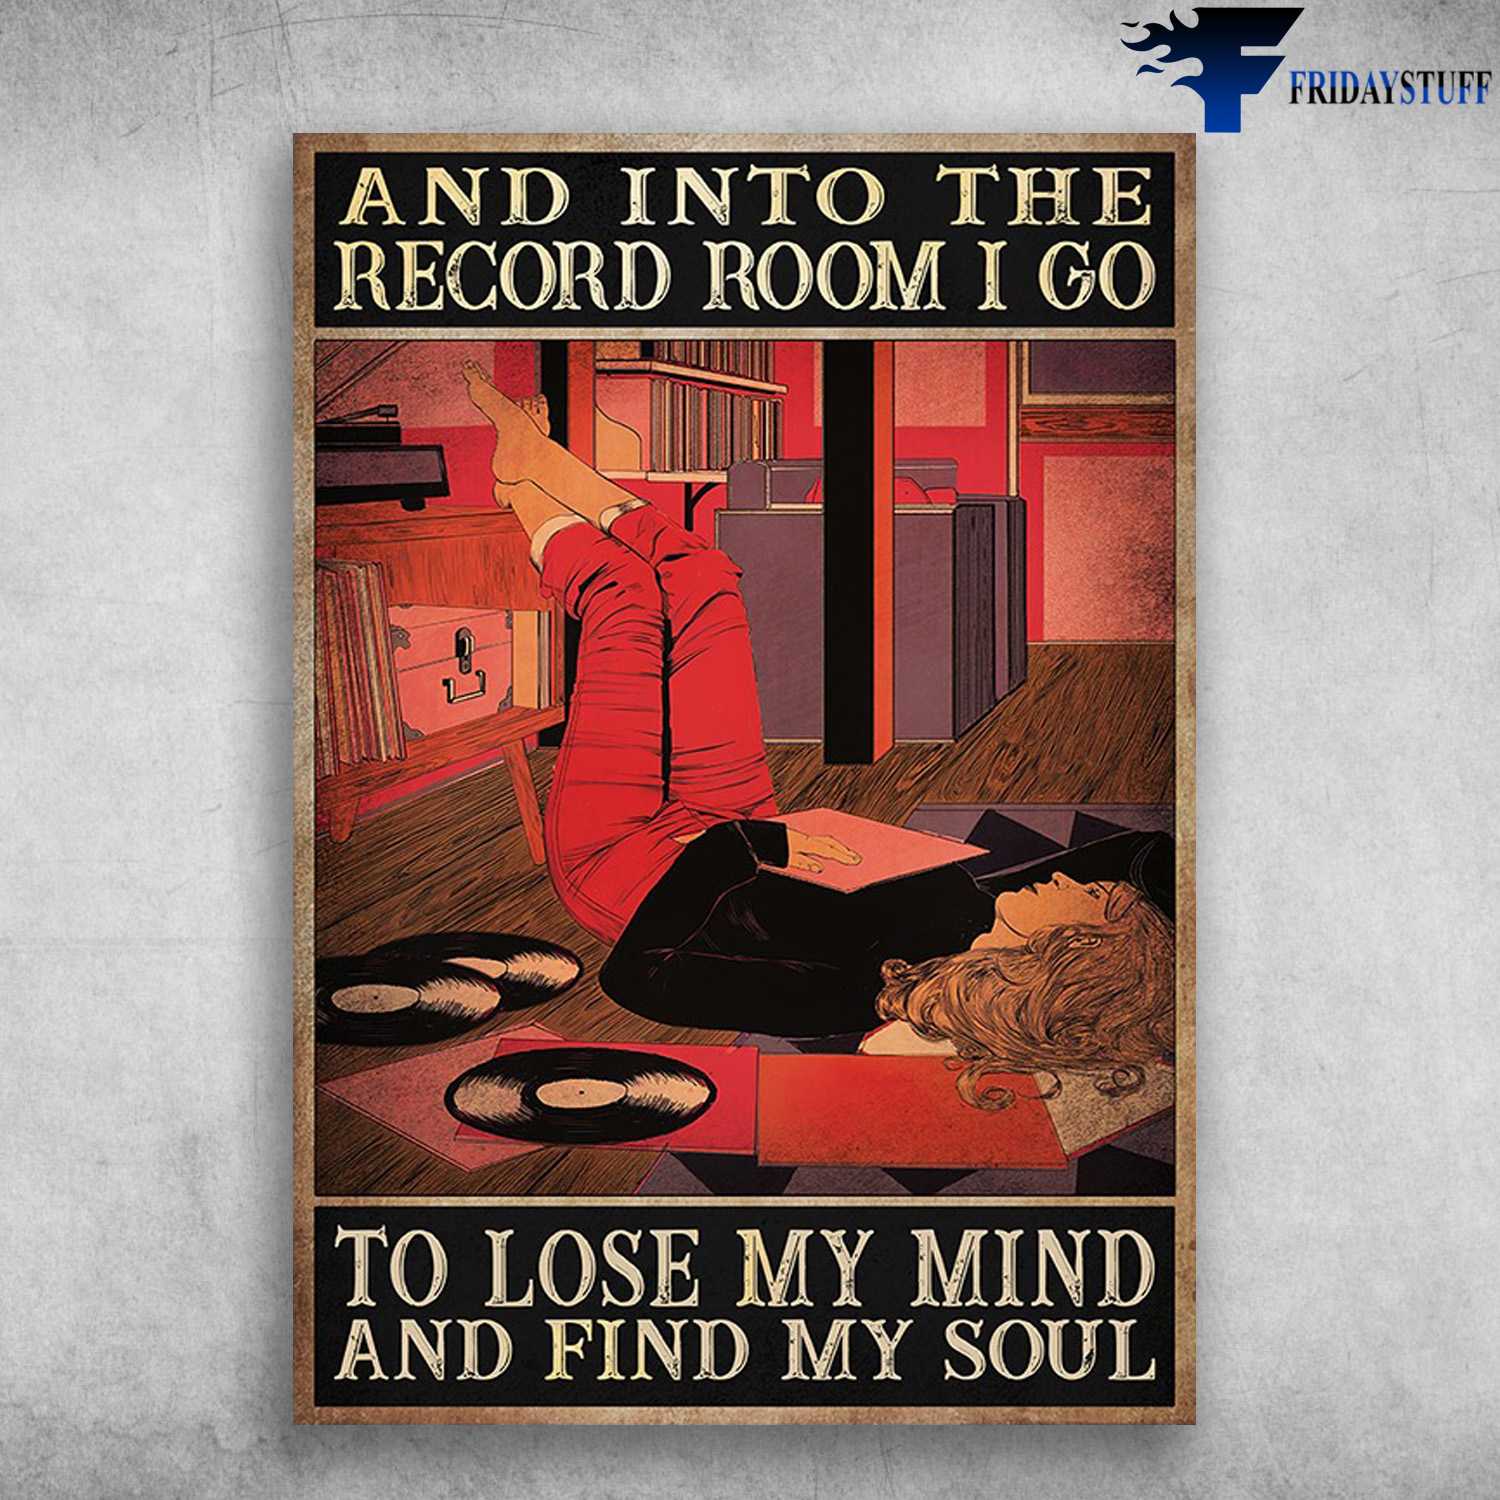 Vinyl Record Girl - And Into The Record Room, I Go To Lose My Mind And Find My Soul